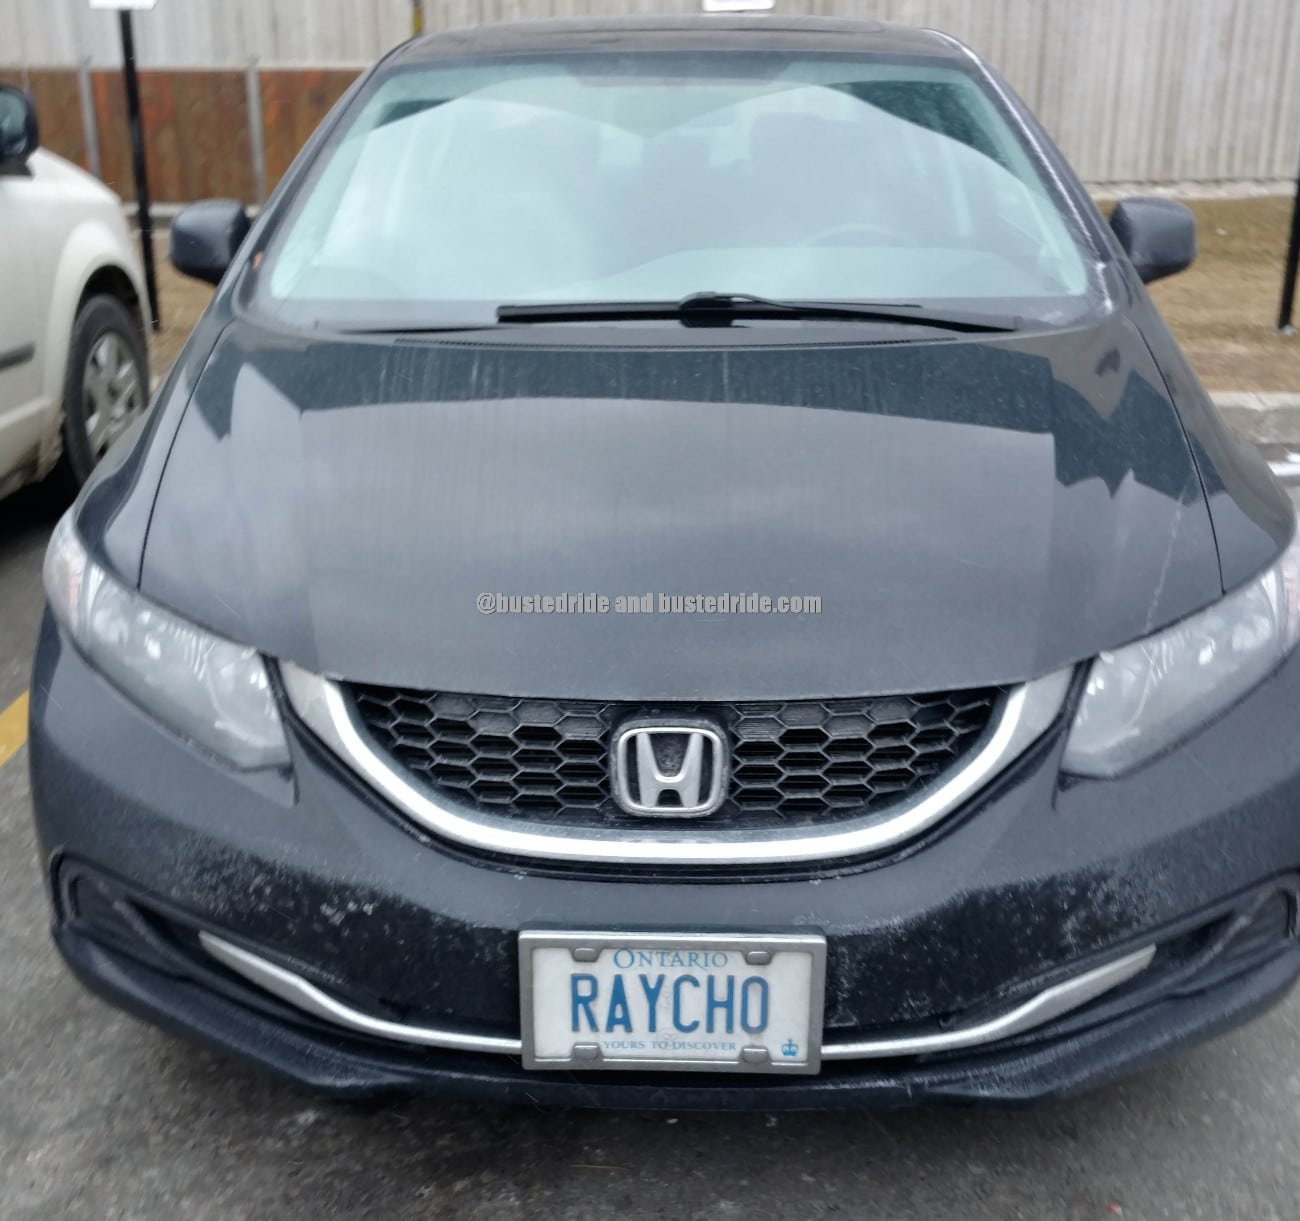 Raycho - Vanity License Plate by Busted Ride